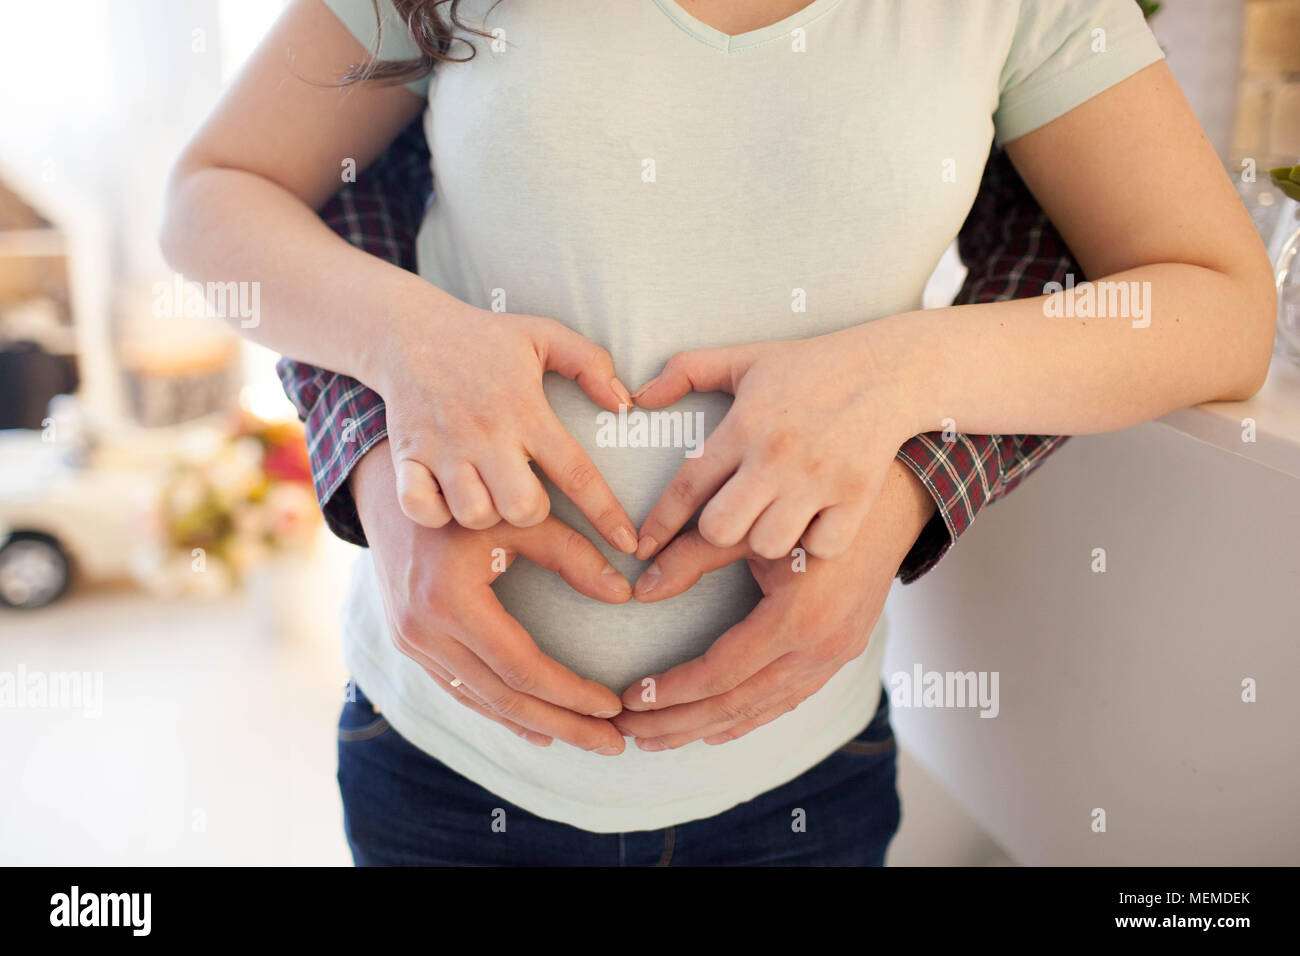 Young pregnant woman holds her hands on her swollen belly. Love concept. Stock Photo